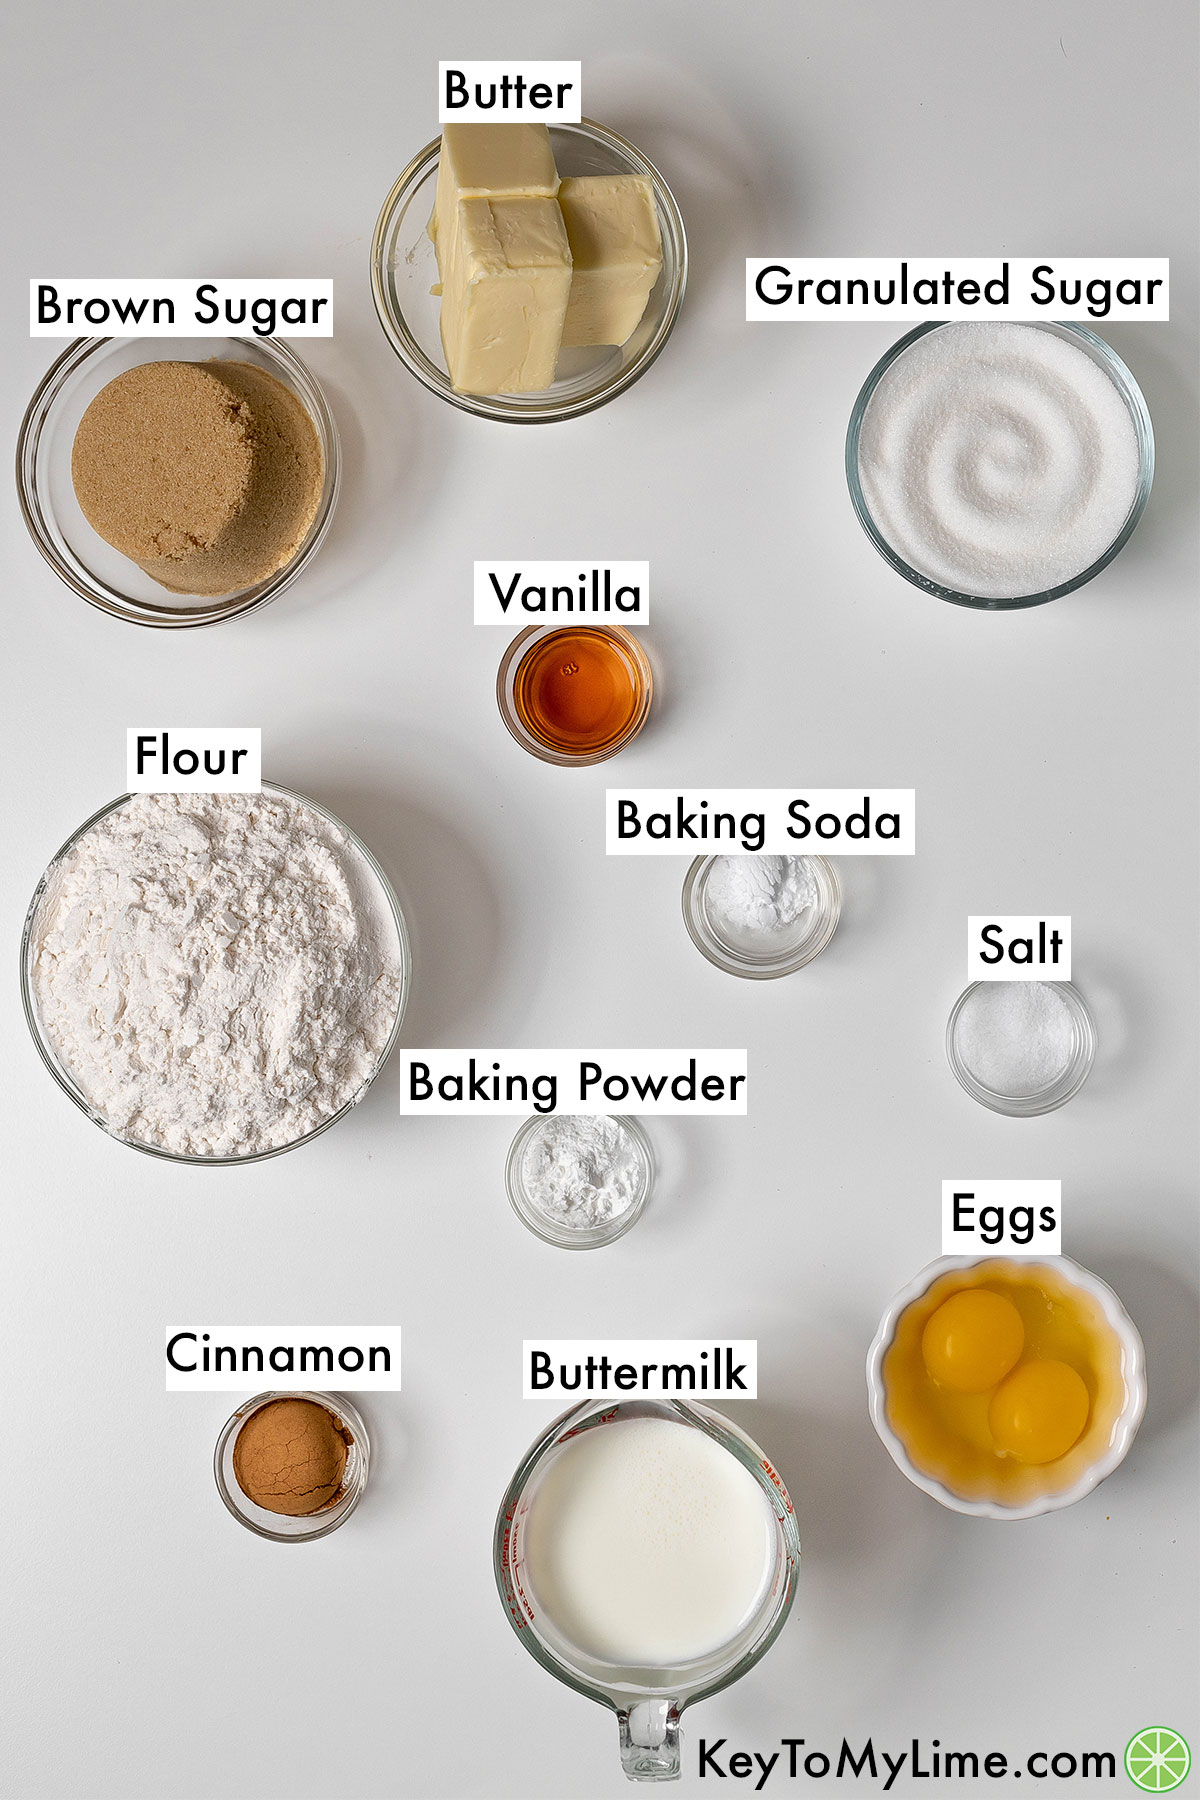 The labeled ingredients for cinnamon coffee cake.